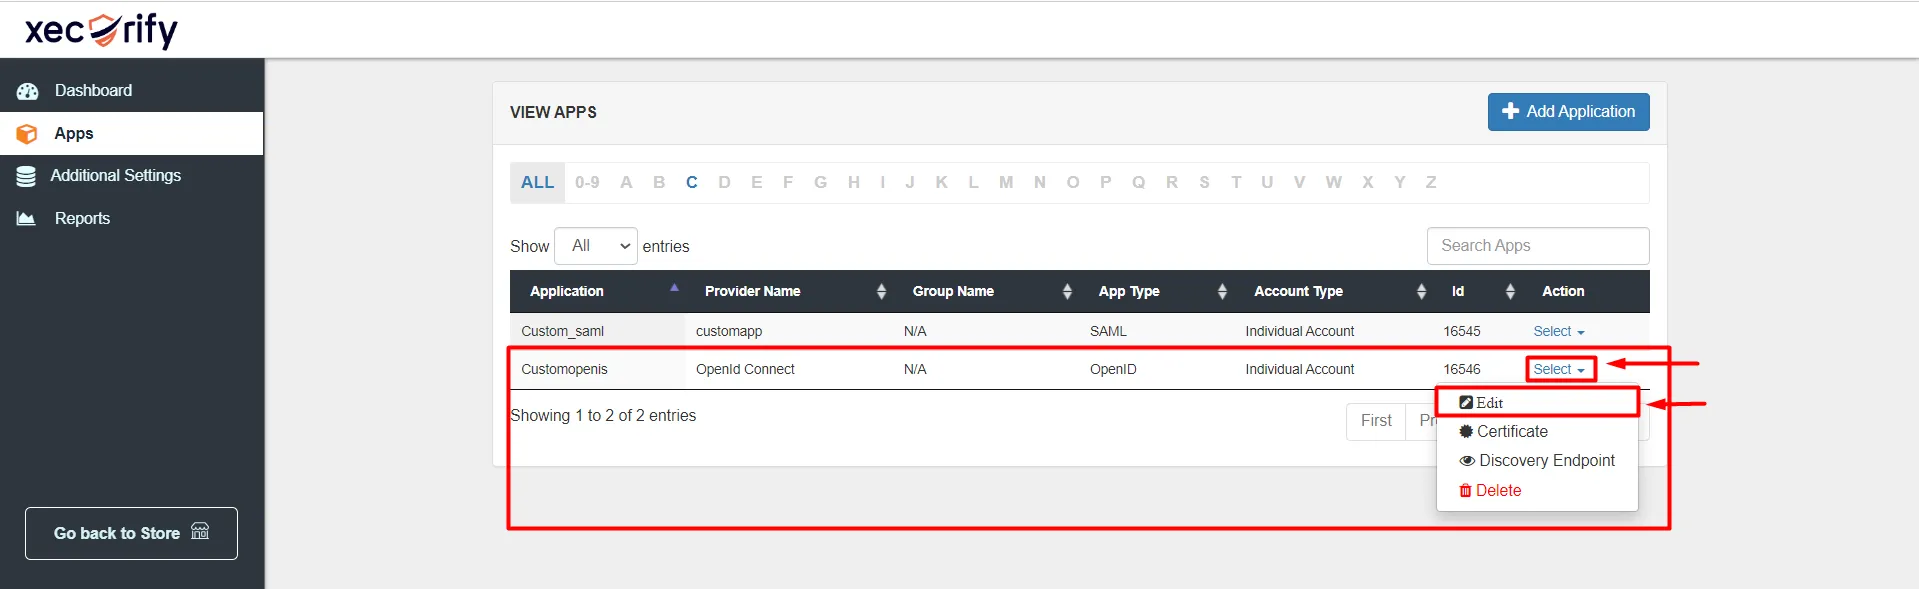 Shopify as IDP - Login using Shopify credentials - get IDP Metadata